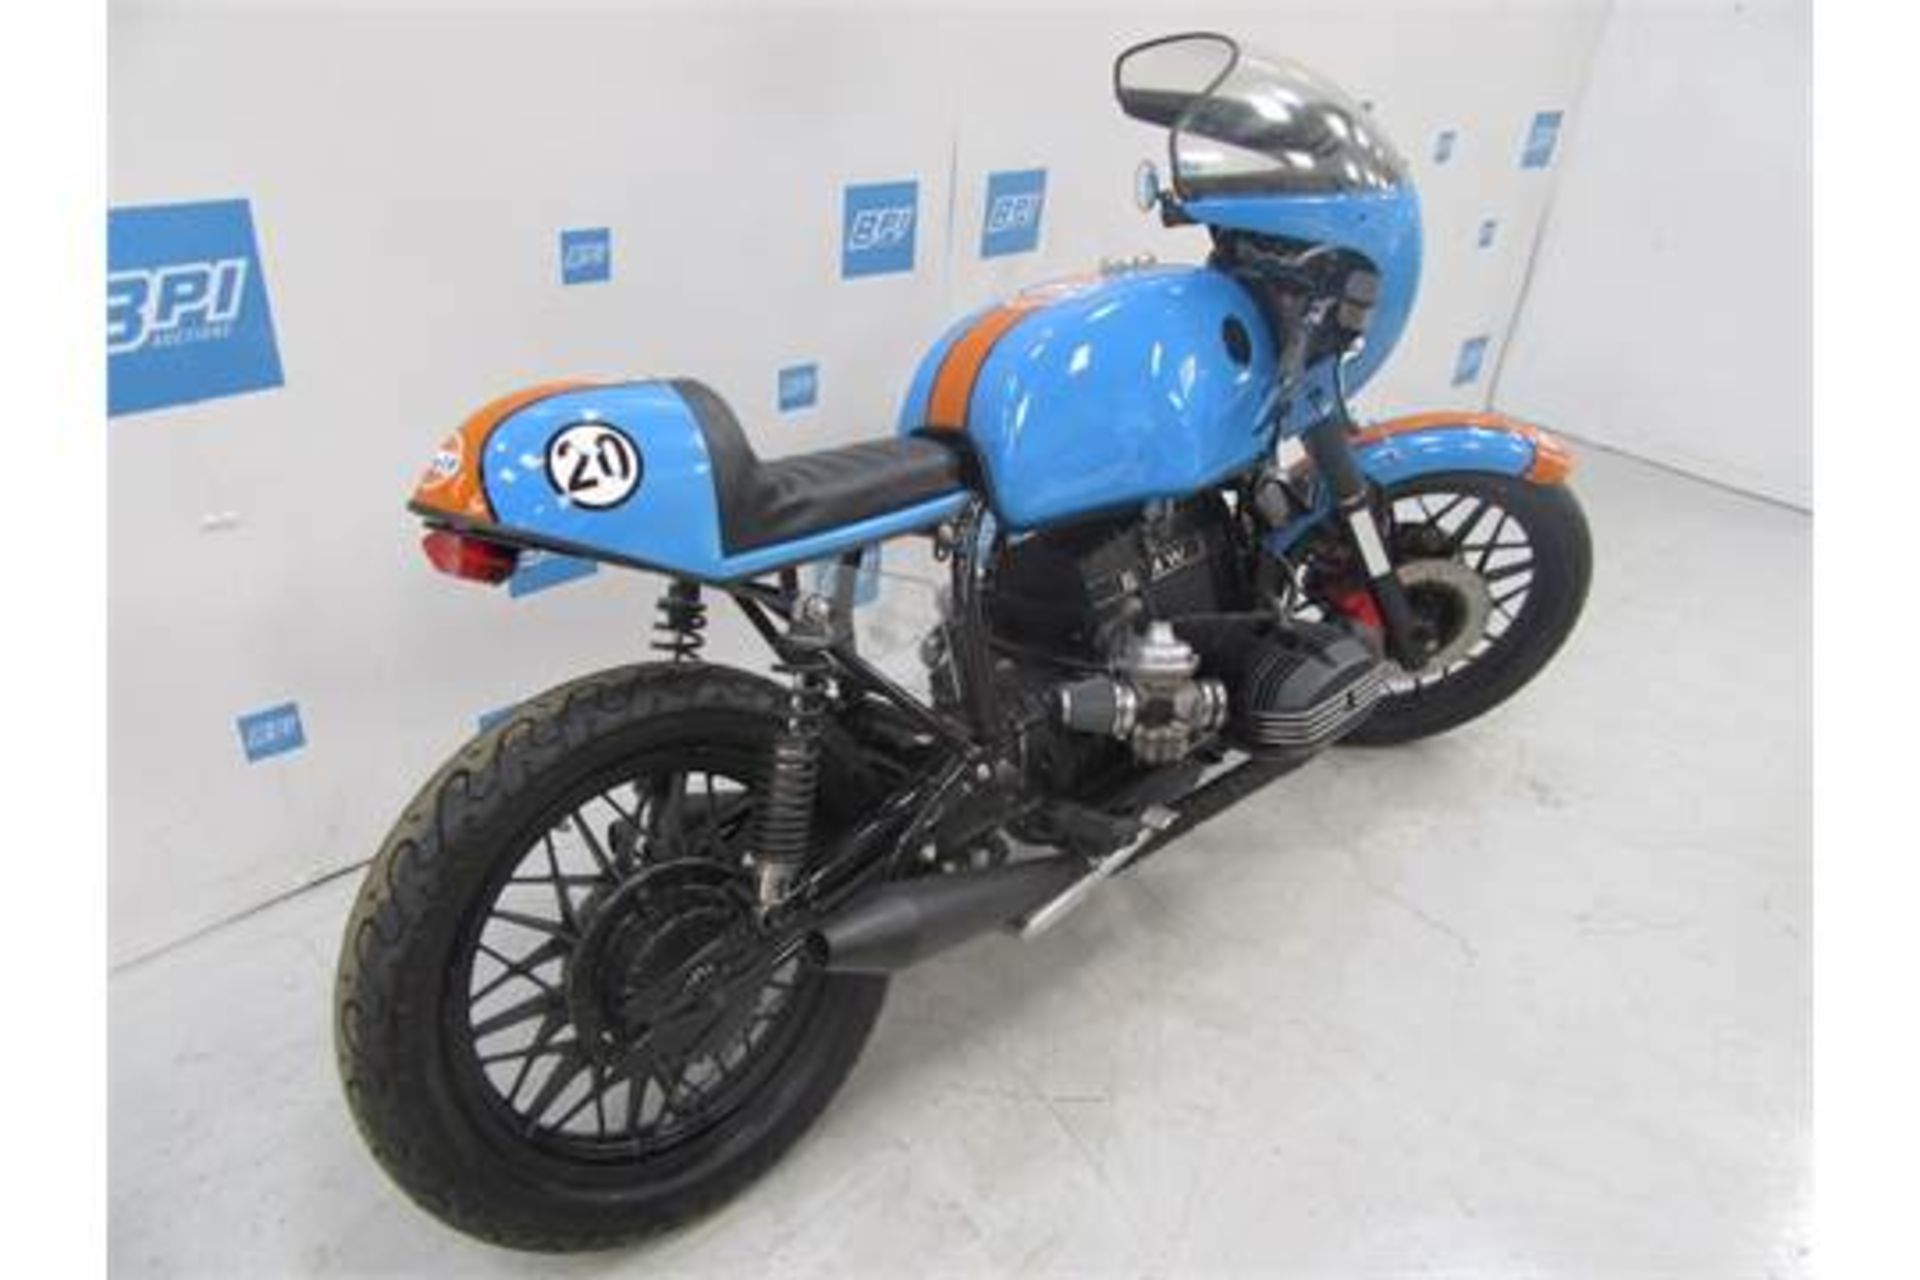 1981 BMW Cafe Racer Gulf - Image 4 of 6